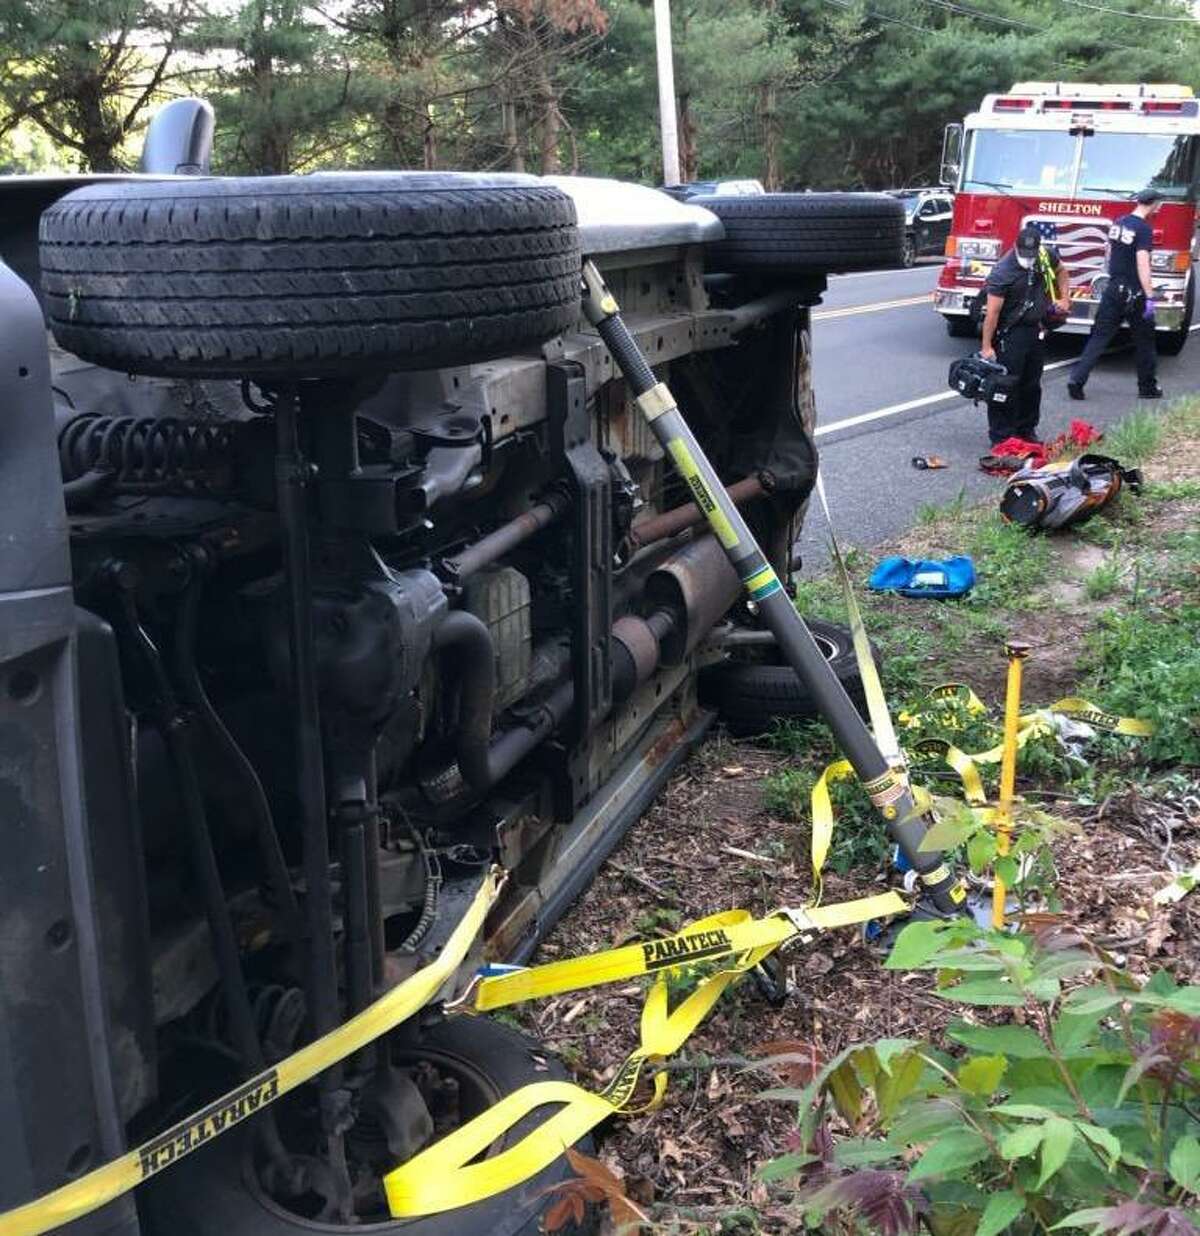 Shelton firefighters companies responded to River Road near Moulthrop Road in July on a report of a single-vehicle rollover with one occupant trapped. The road is the scene of numerous accidents, which is why the state is now installing centerline rumble strips.